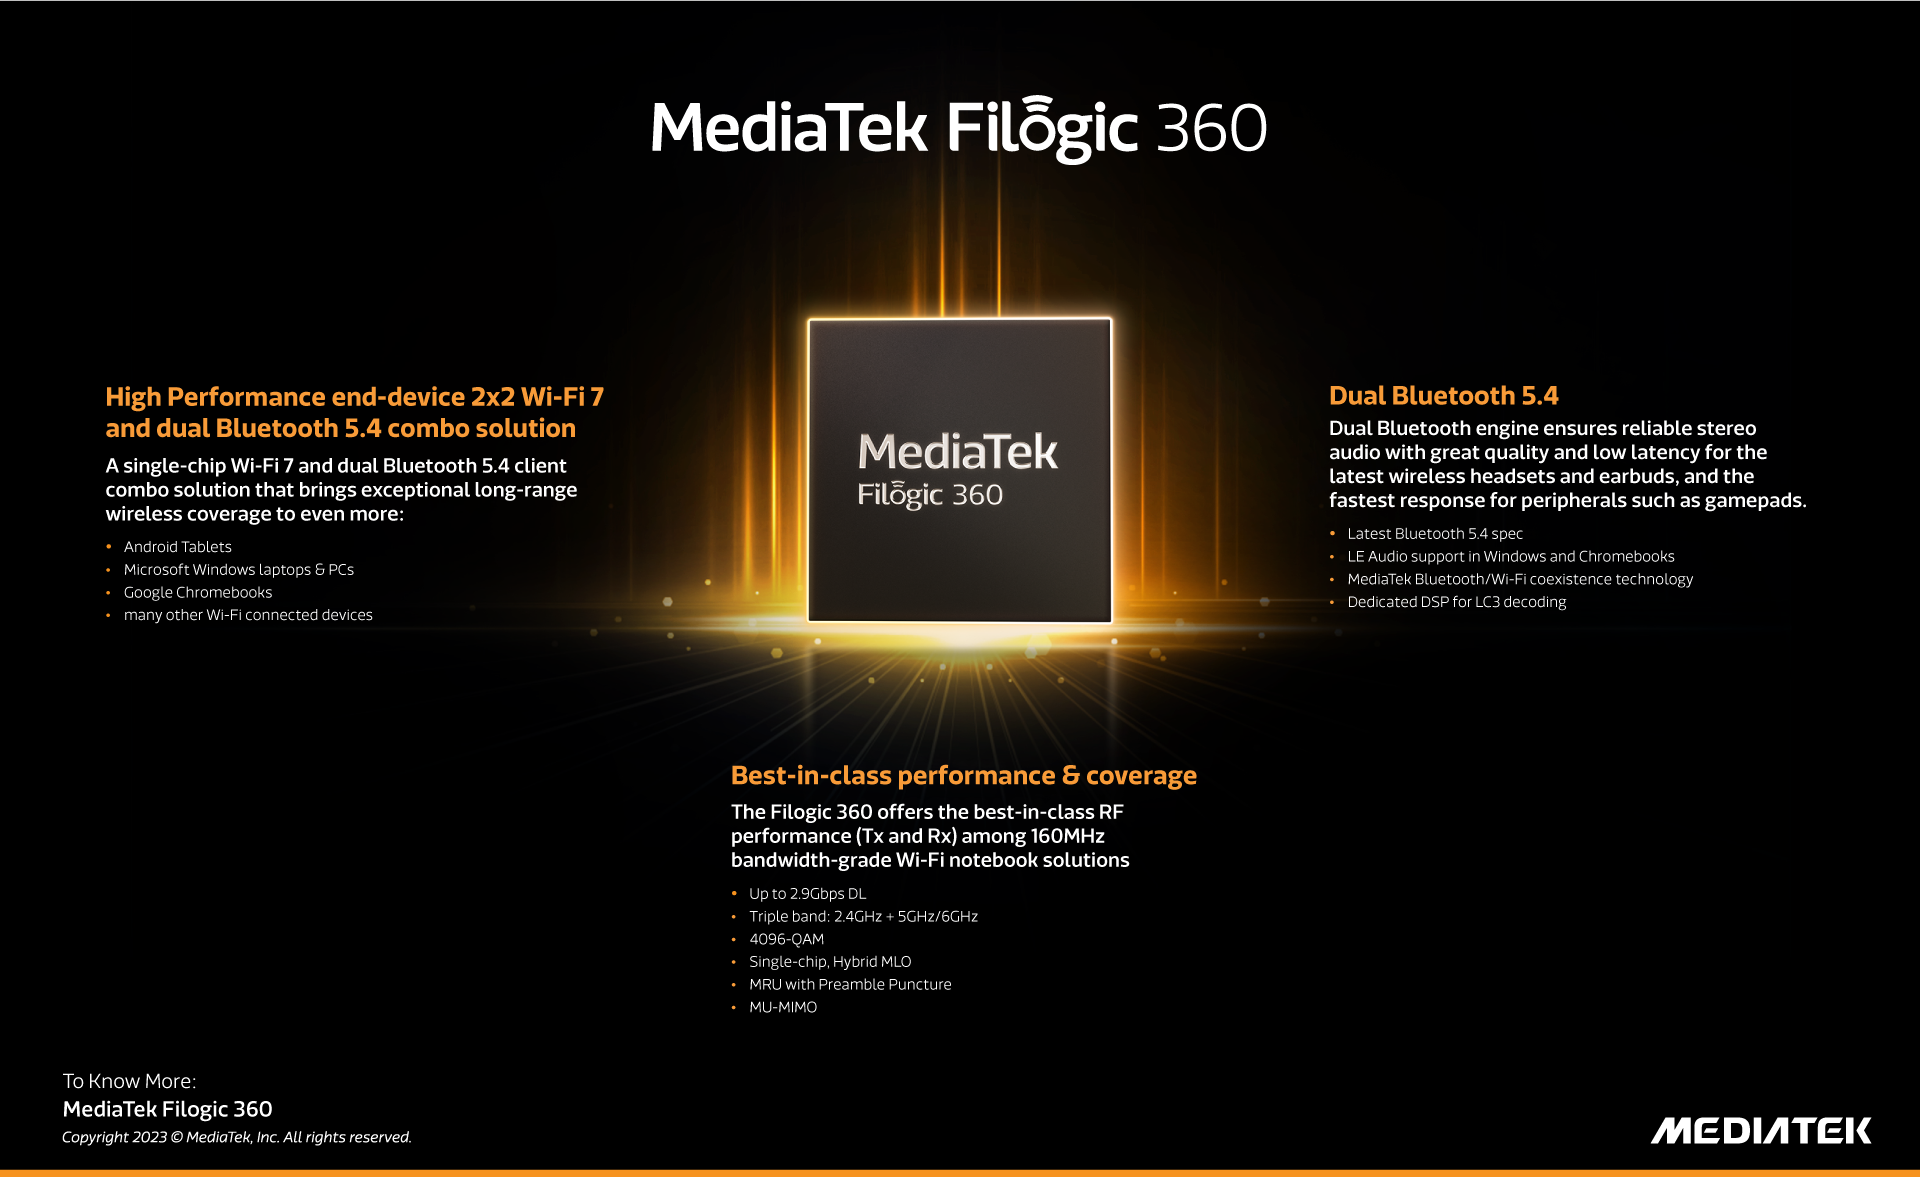 Key features of the Filogic 360 include